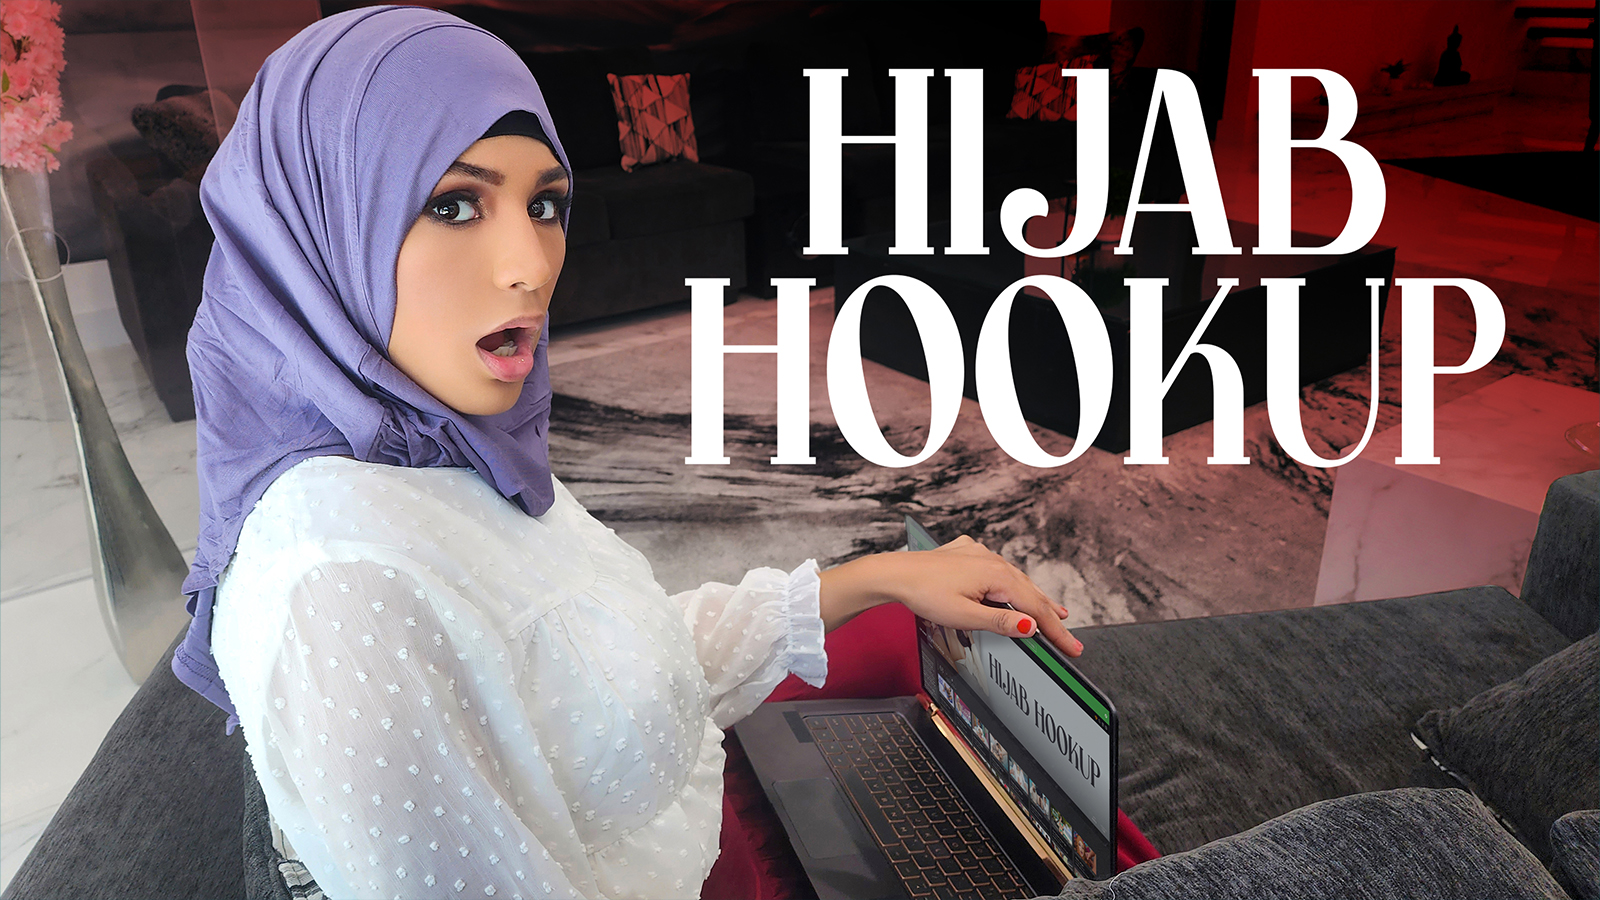 Nina Nieves “The Future Prom Queen” HijabHookup